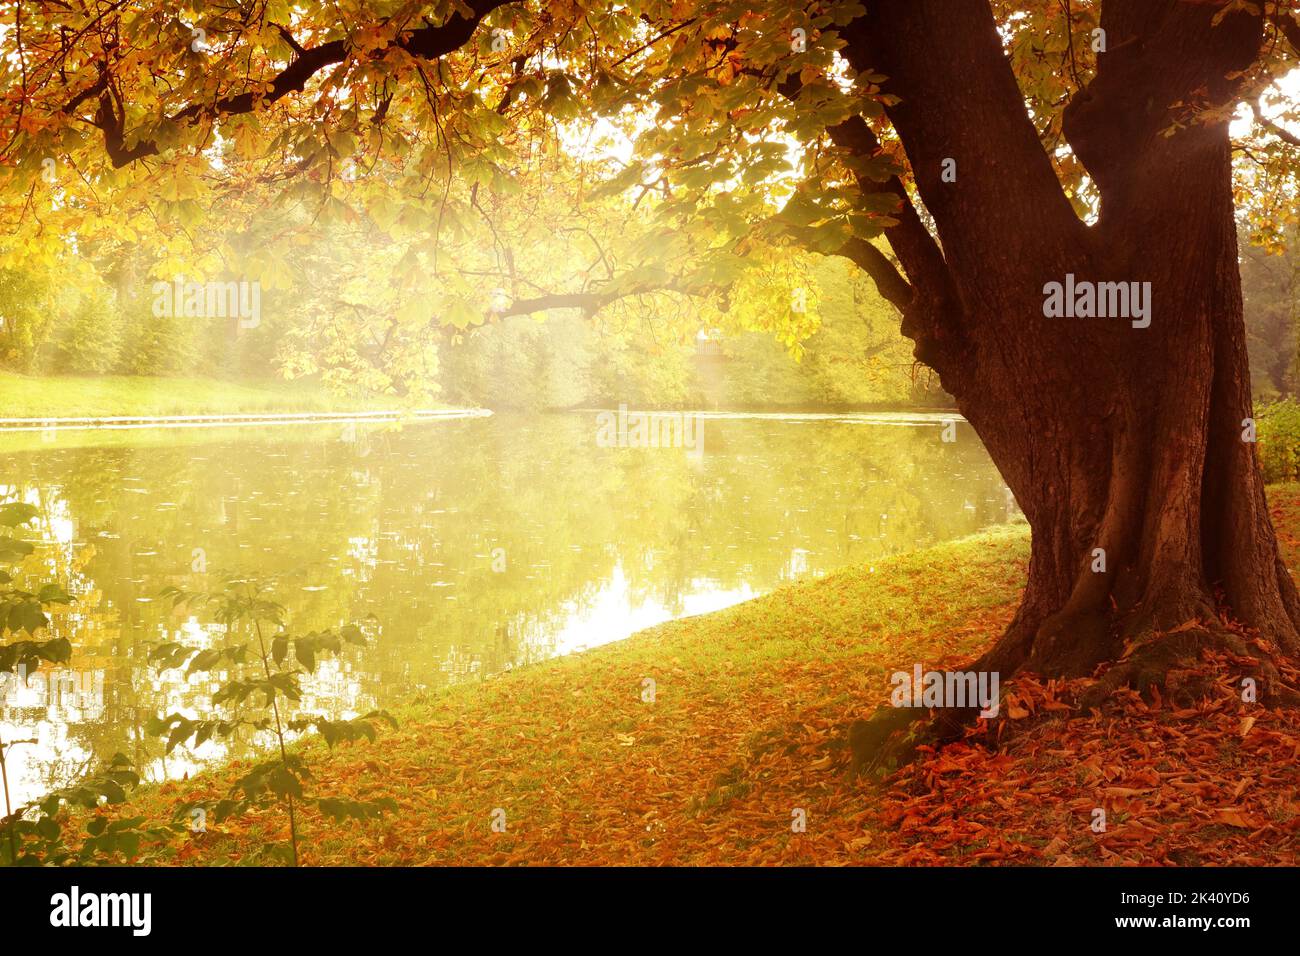 Autumn landscape with trees with leaves in autumn colors and colorful foliage and sunlight in beautiful sunny day Stock Photo